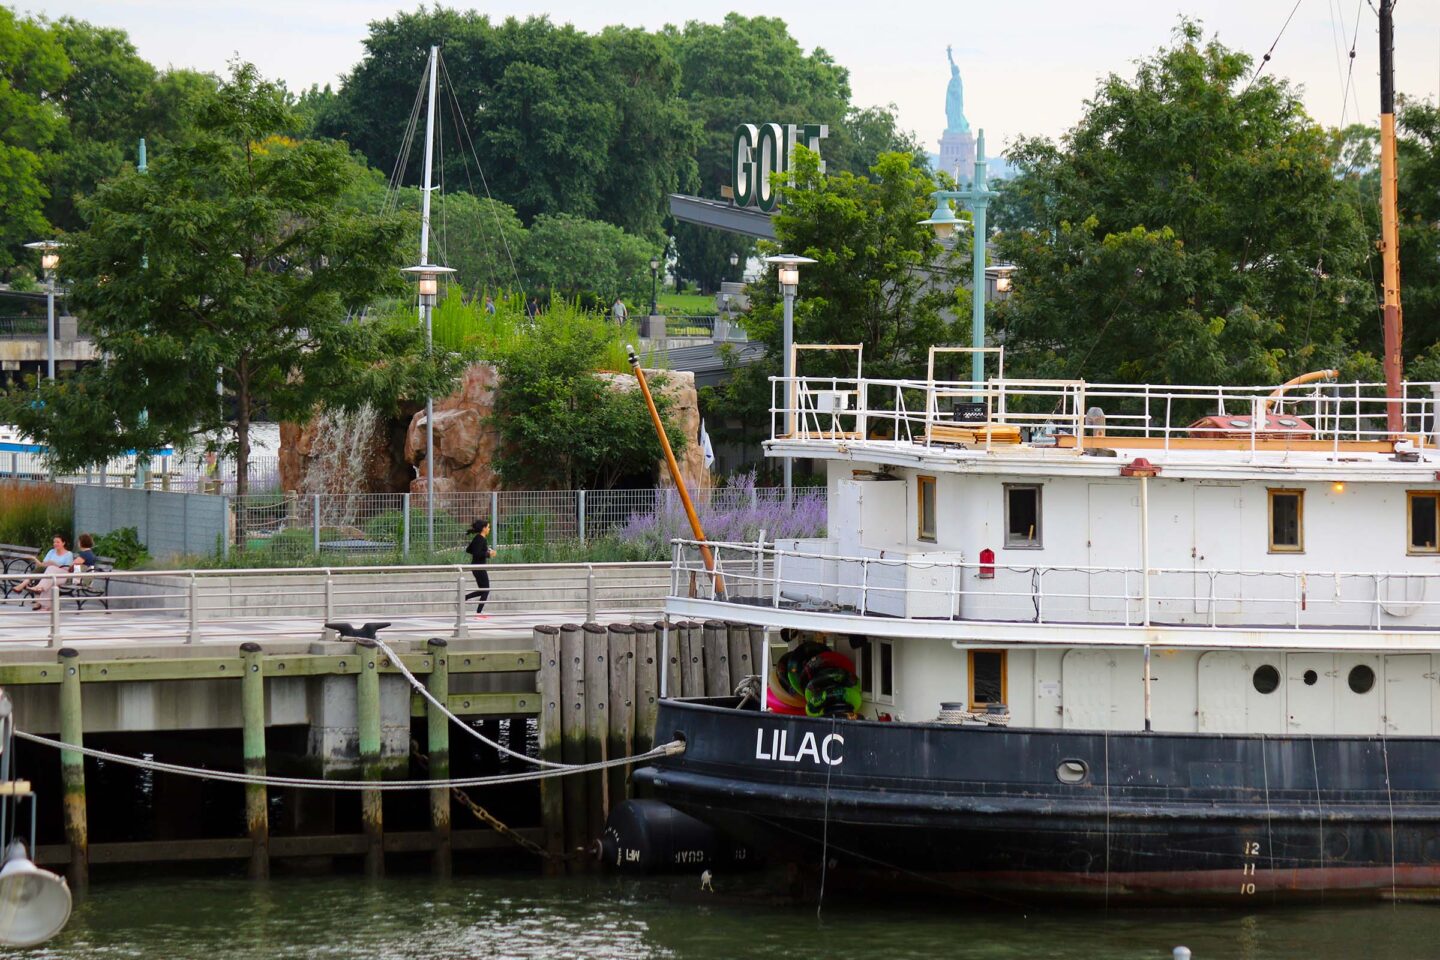 A closeup view of the Lilac, a historical vessel on Pier 25